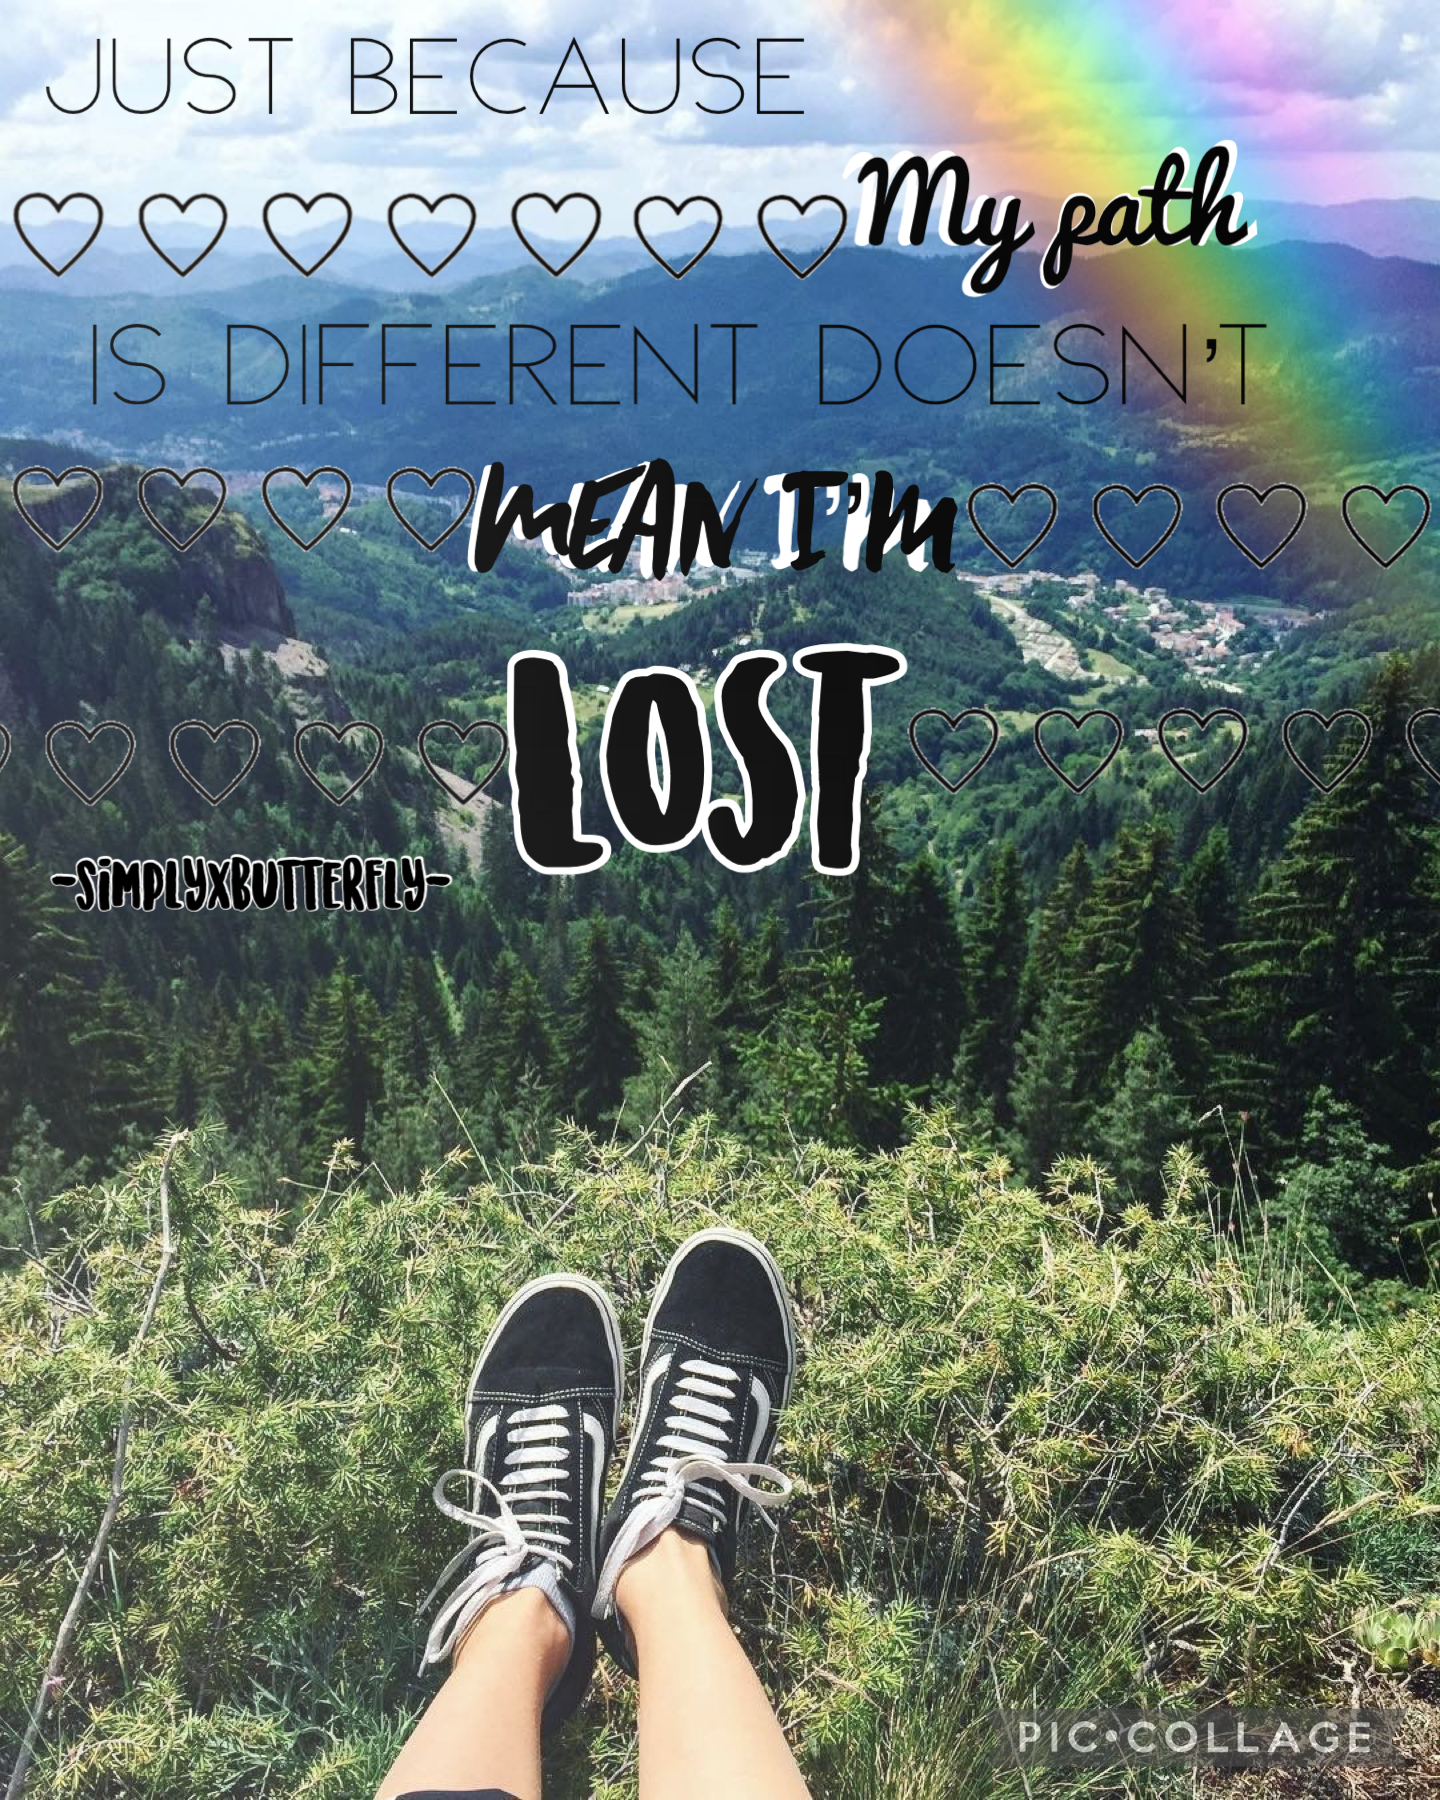 ⛰TAP⛰ (5/17/21)
I have lots of ideas floating around my head, but I’m so lazy to make them. 😂 This one I made was rushed so it looks so bad I know. 😭 Qotd: Have you gone hiking before? Aotd: Yes I have!